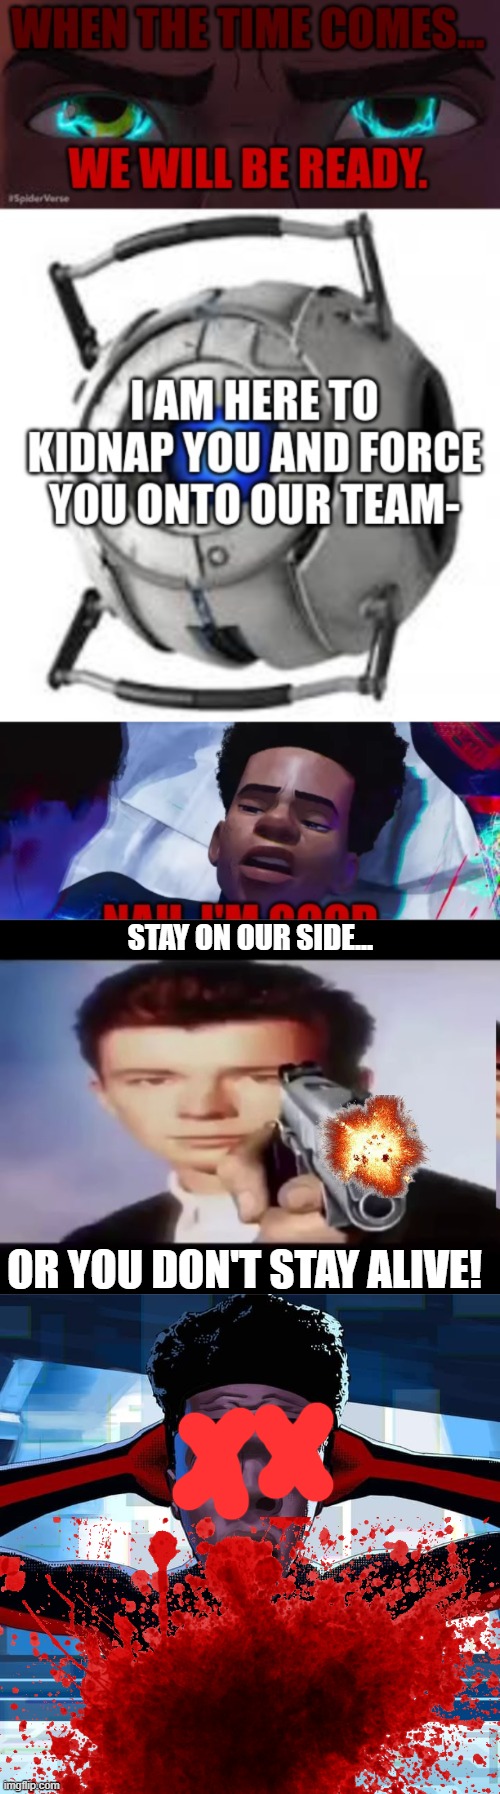 STAY ON OUR SIDE... OR YOU DON'T STAY ALIVE! | image tagged in rick with gun,miles morales | made w/ Imgflip meme maker